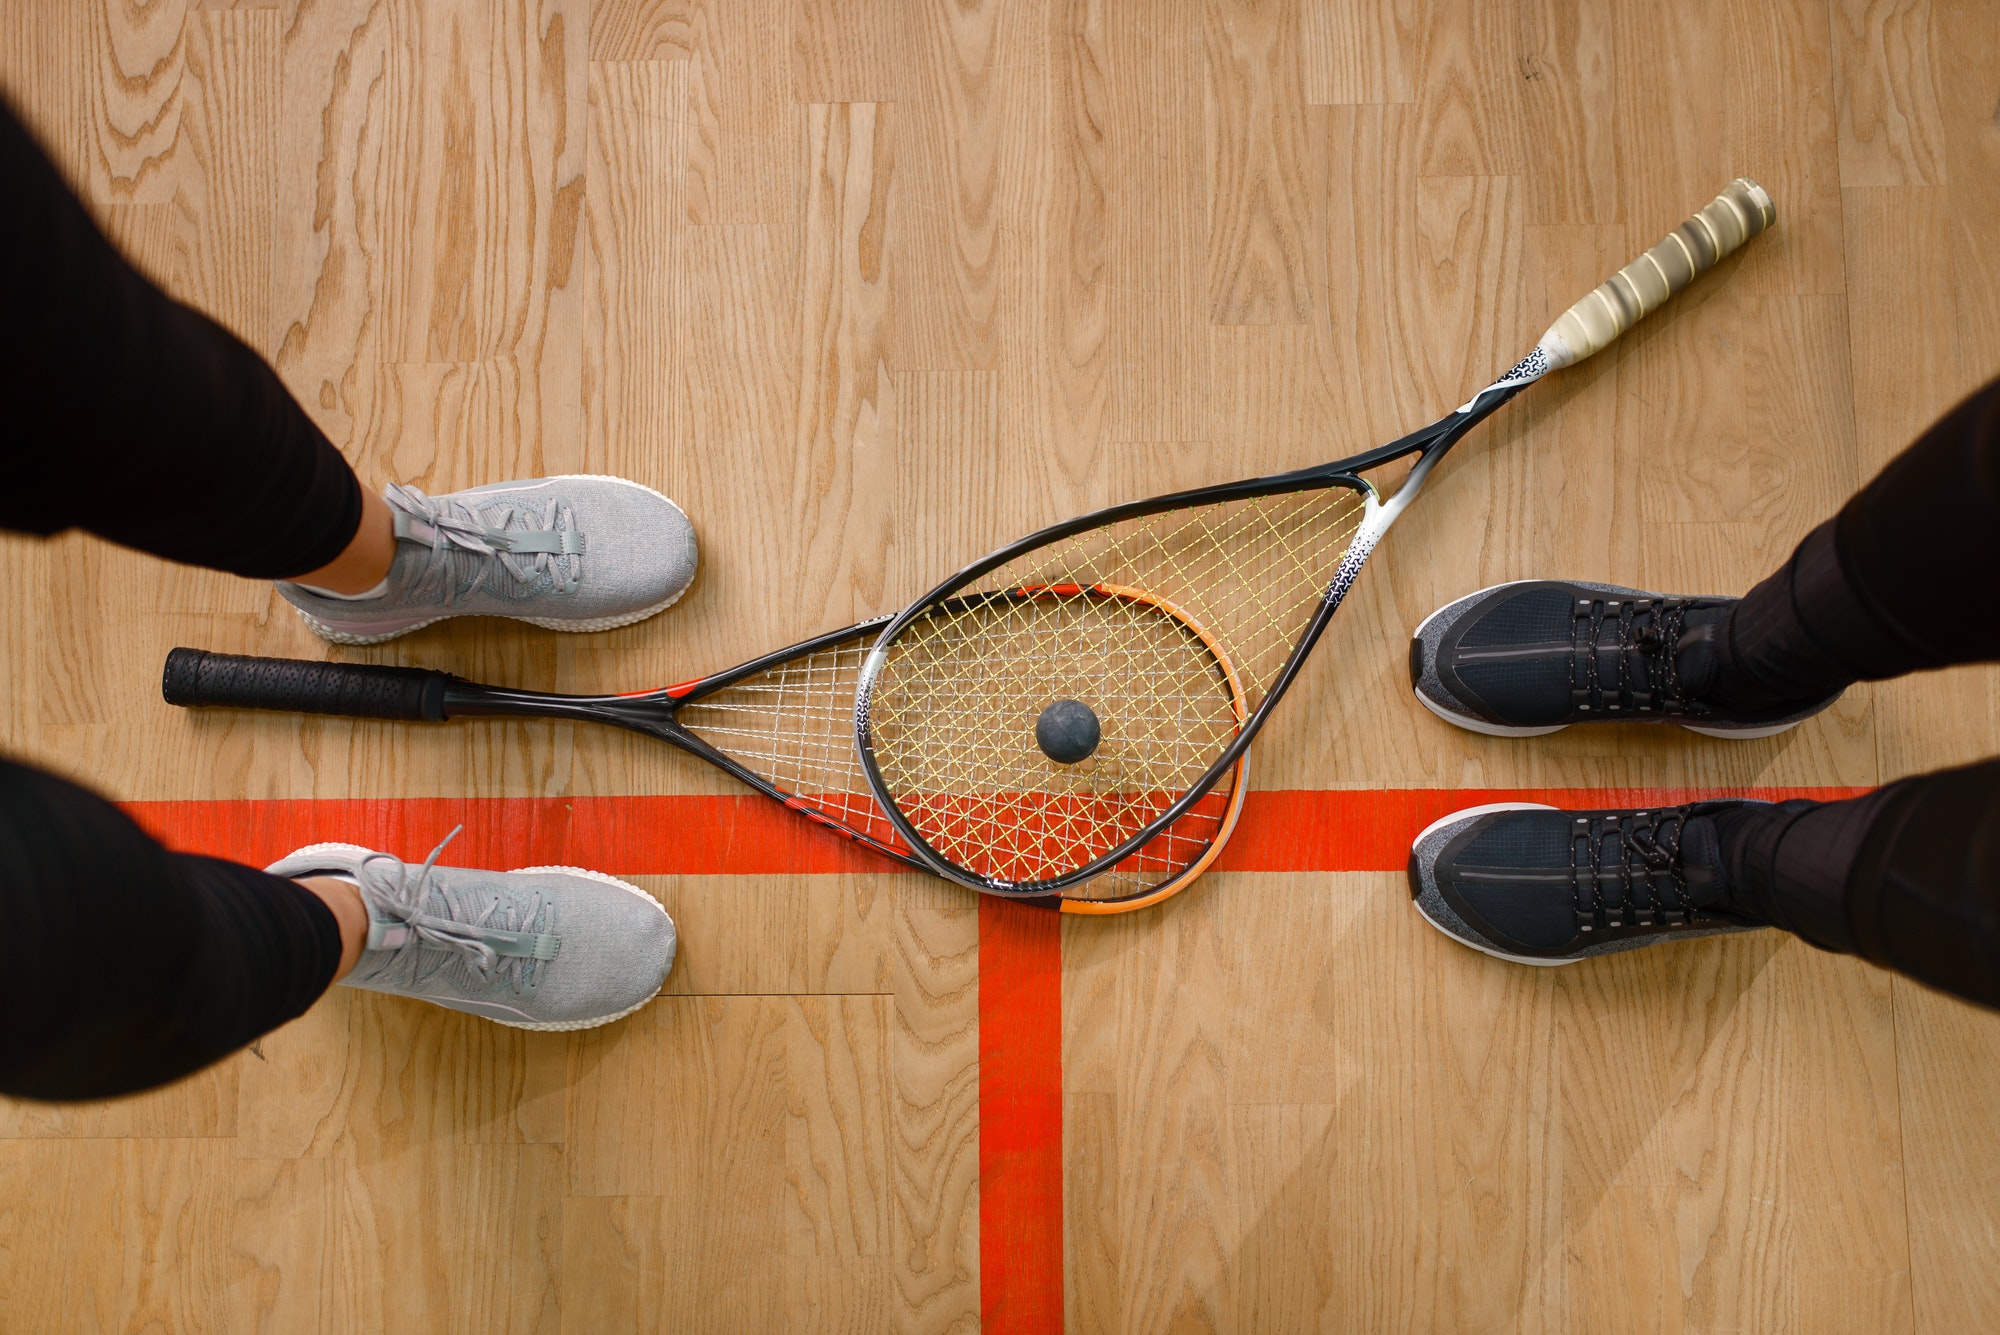 Female players legs and squash rackets, top view